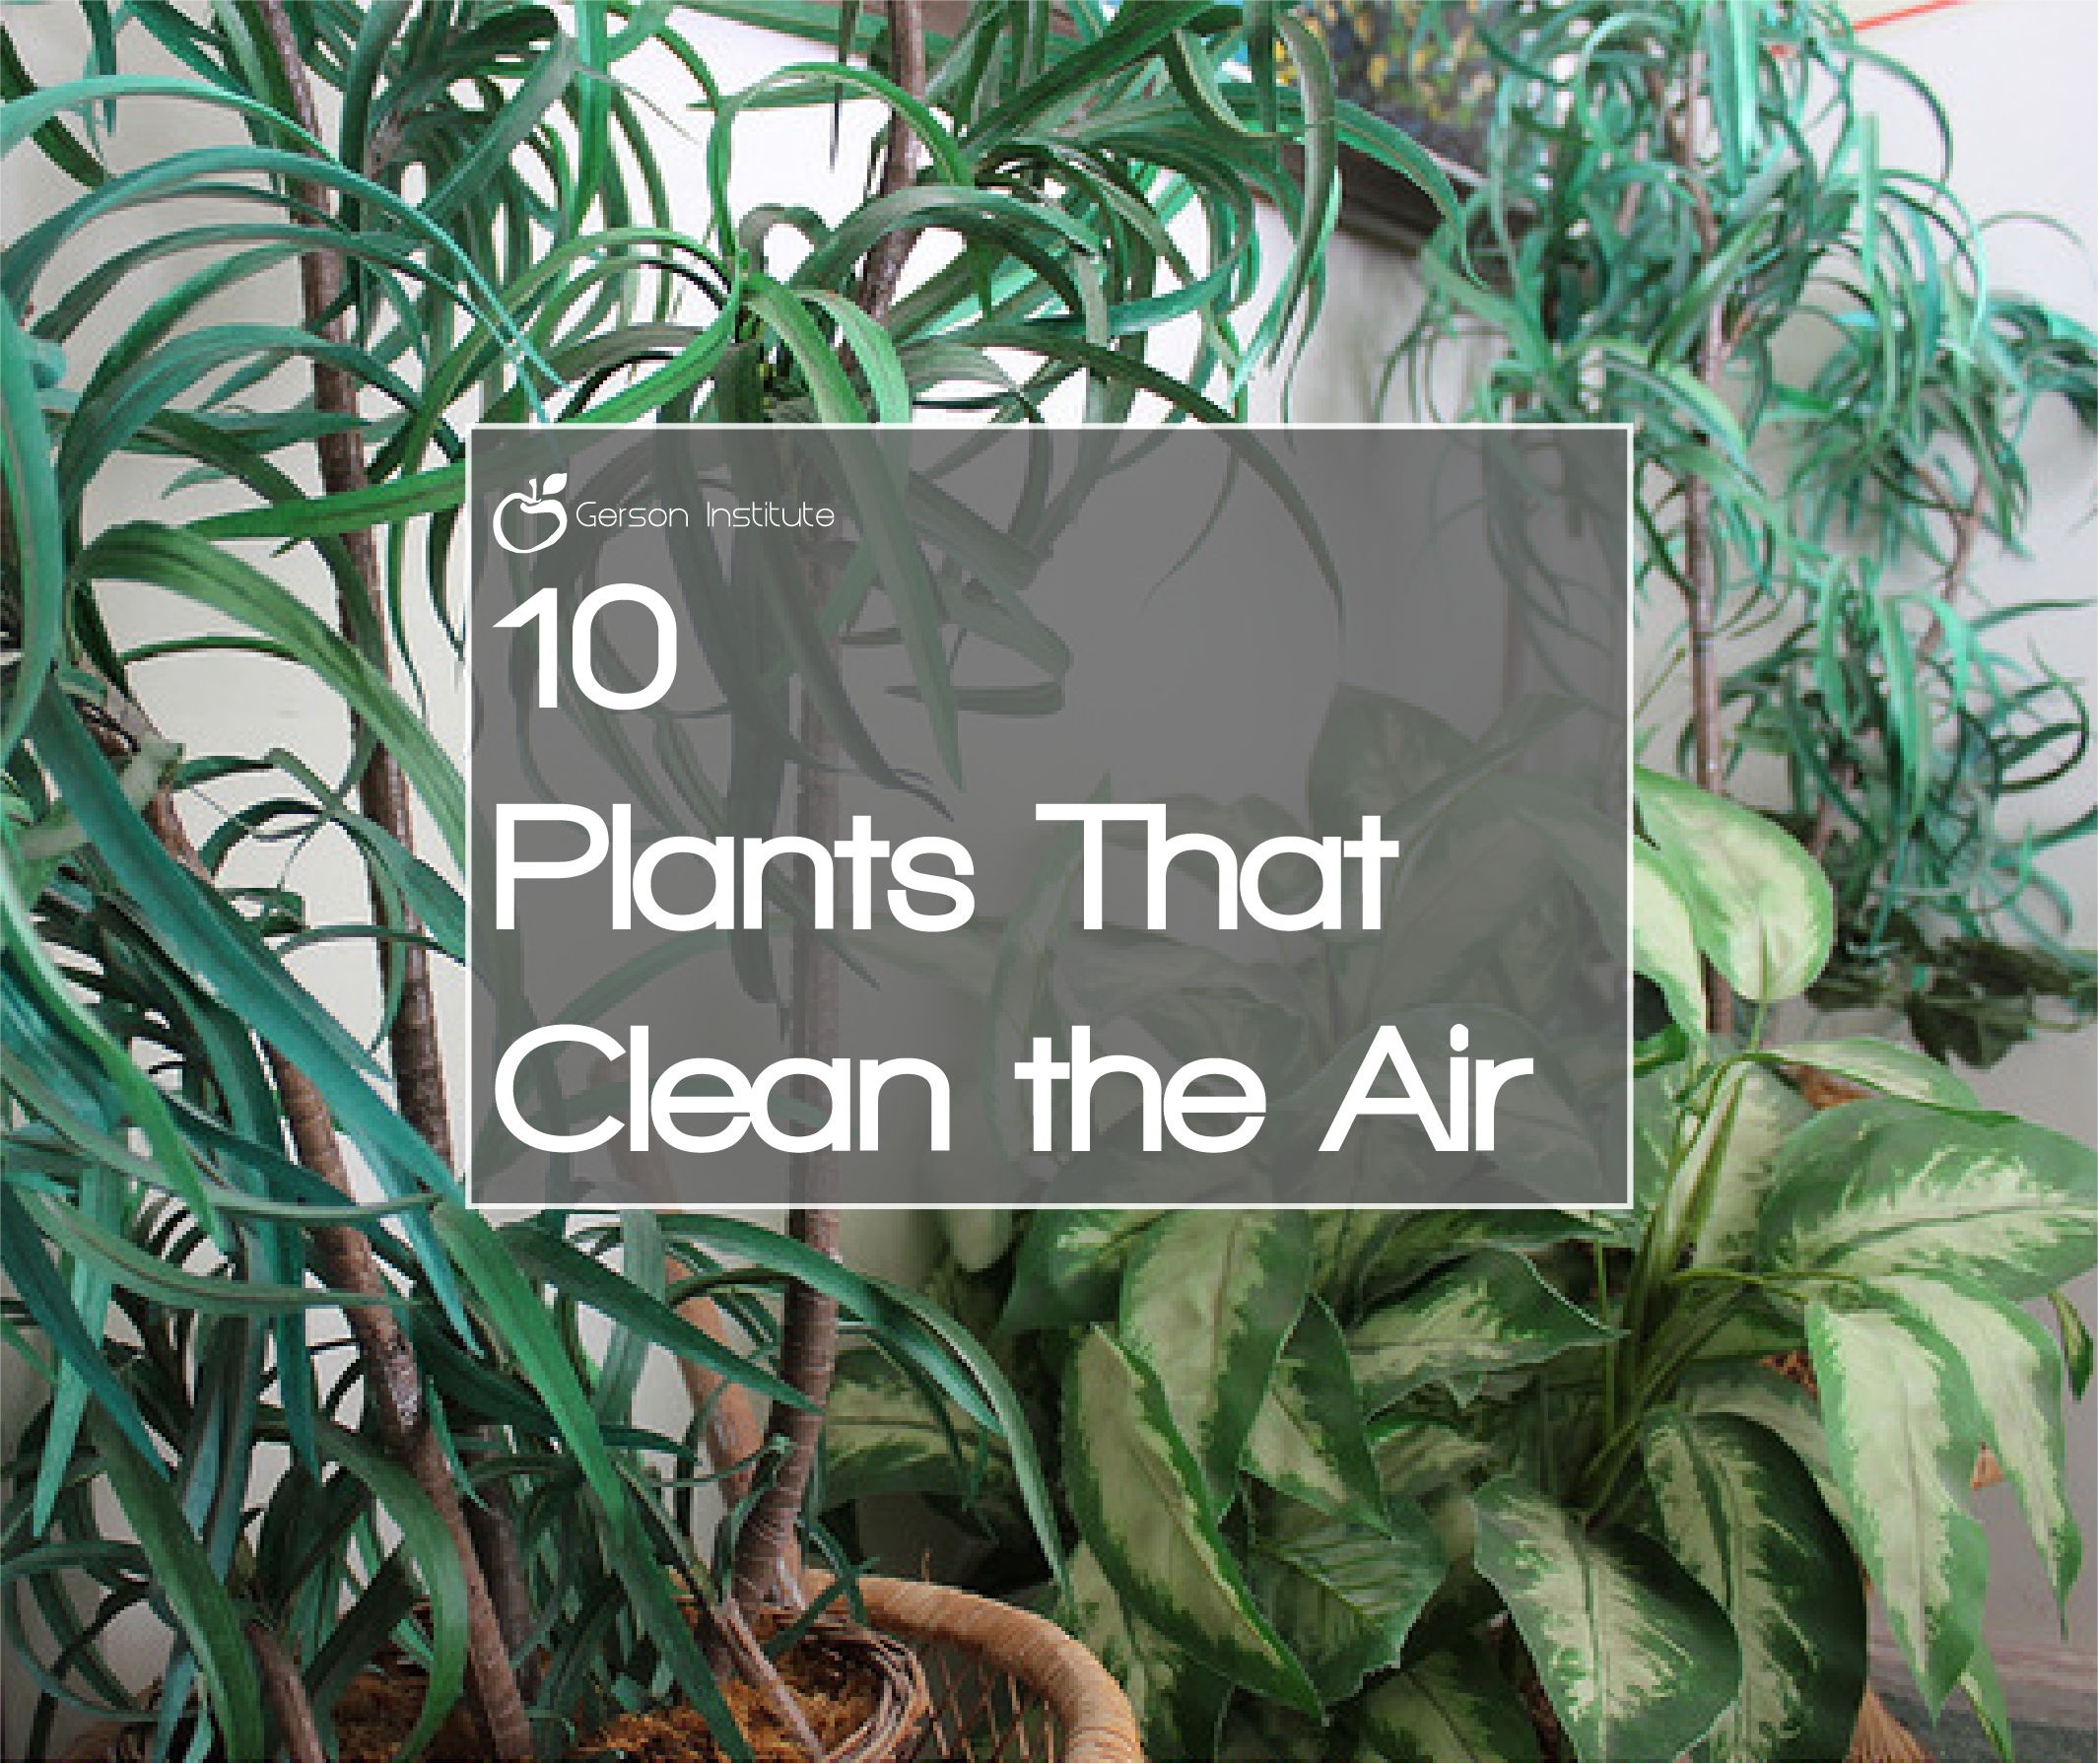 10 Plants That Clean the Air | Gerson Institute : Gerson Institute